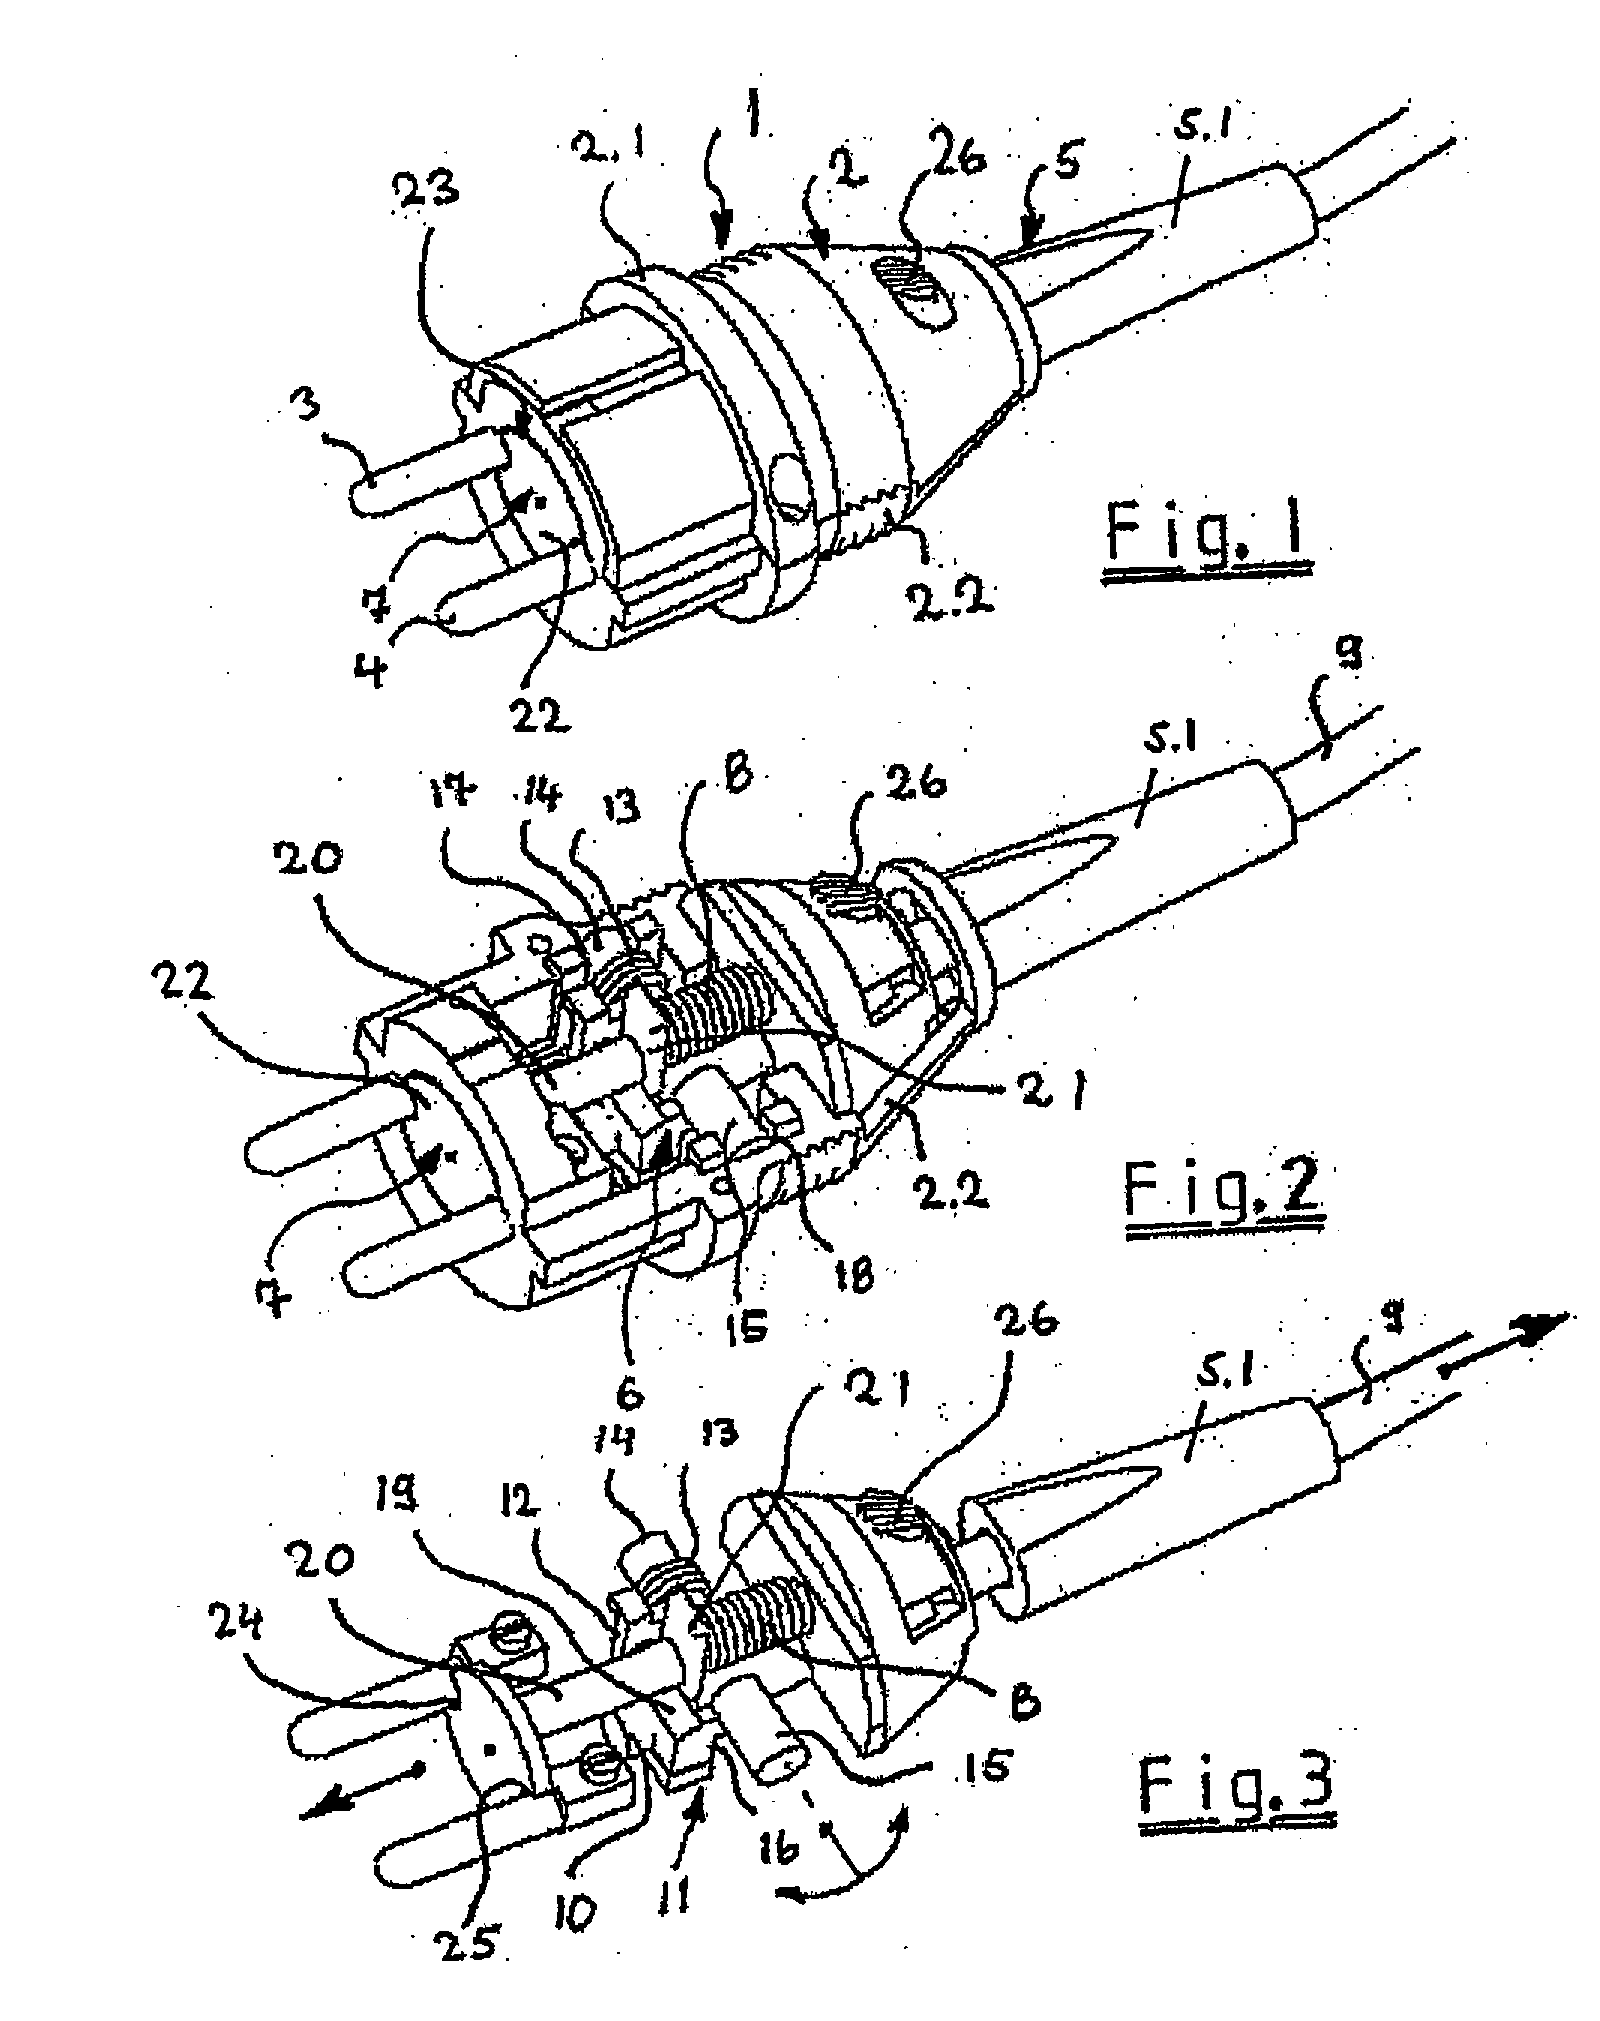 Electric plug comprising a plug housing and at least two integrated plug-in contacts with an ejection mechanism